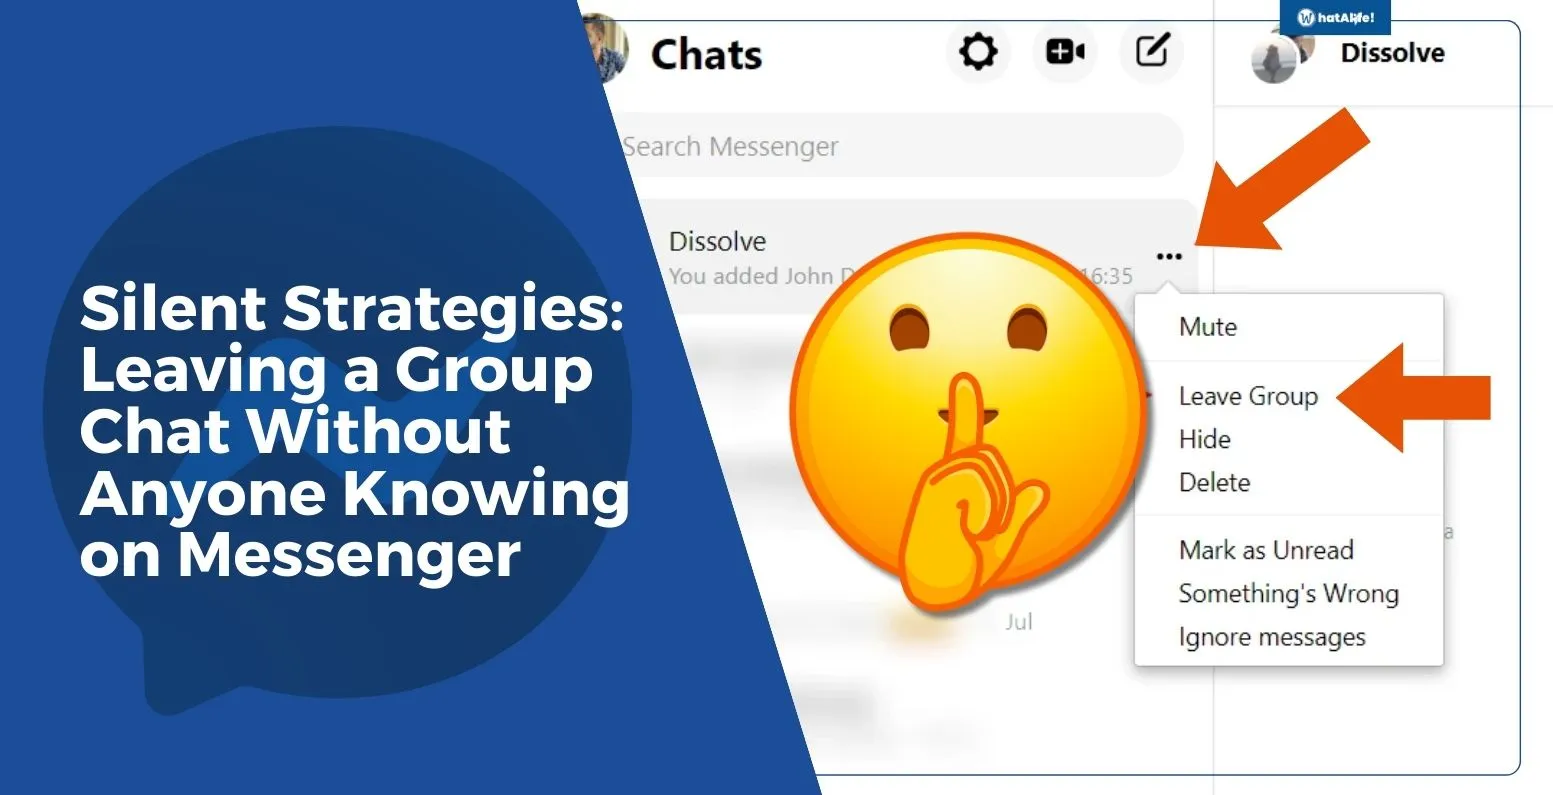 Silent Strategies: Leaving a Group Chat Without Anyone Knowing on Messenger 